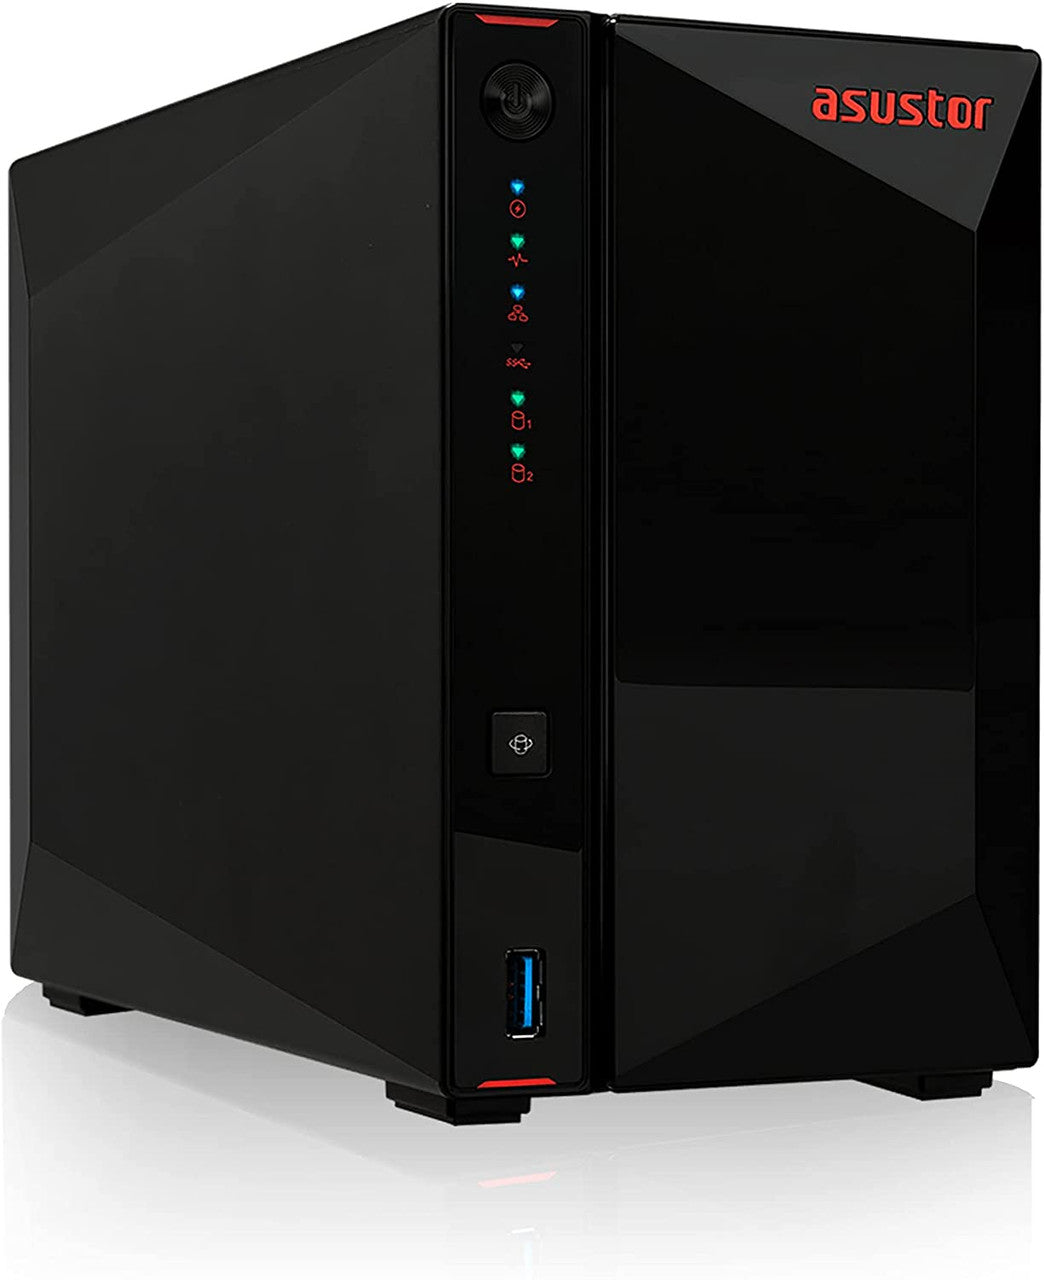 Asustor AS5202T 2-Bay Nimbustor 2 NAS with 8GB RAM and 24TB (2 x 12TB) Western Digital RED Plus Drives Fully Assembled and Tested